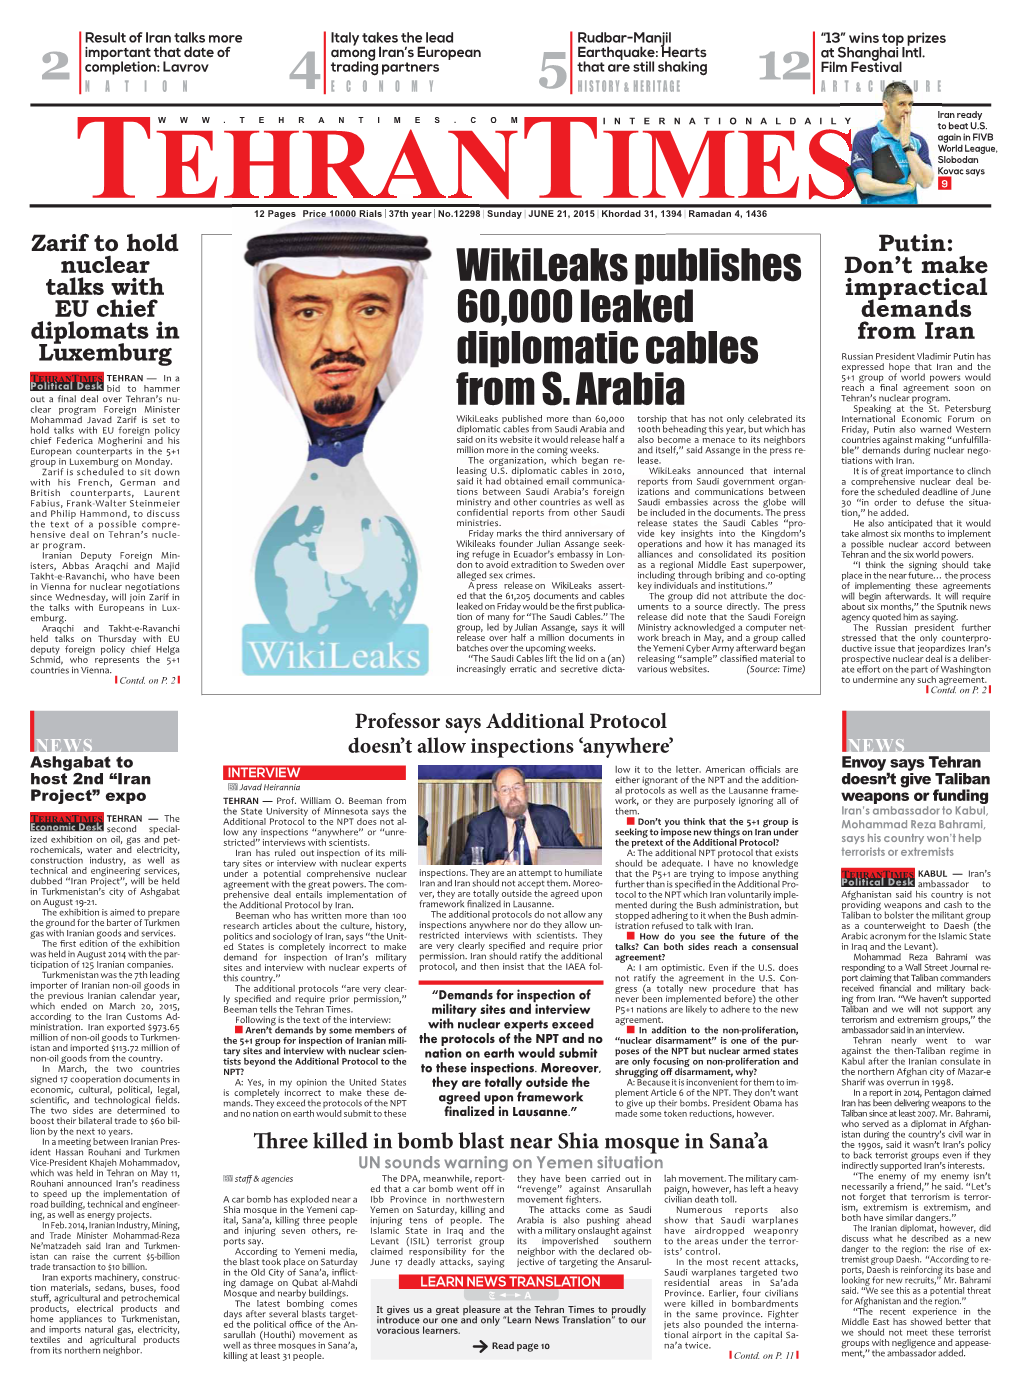 Wikileaks Publishes 60,000 Leaked Diplomatic Cables from S. Arabia